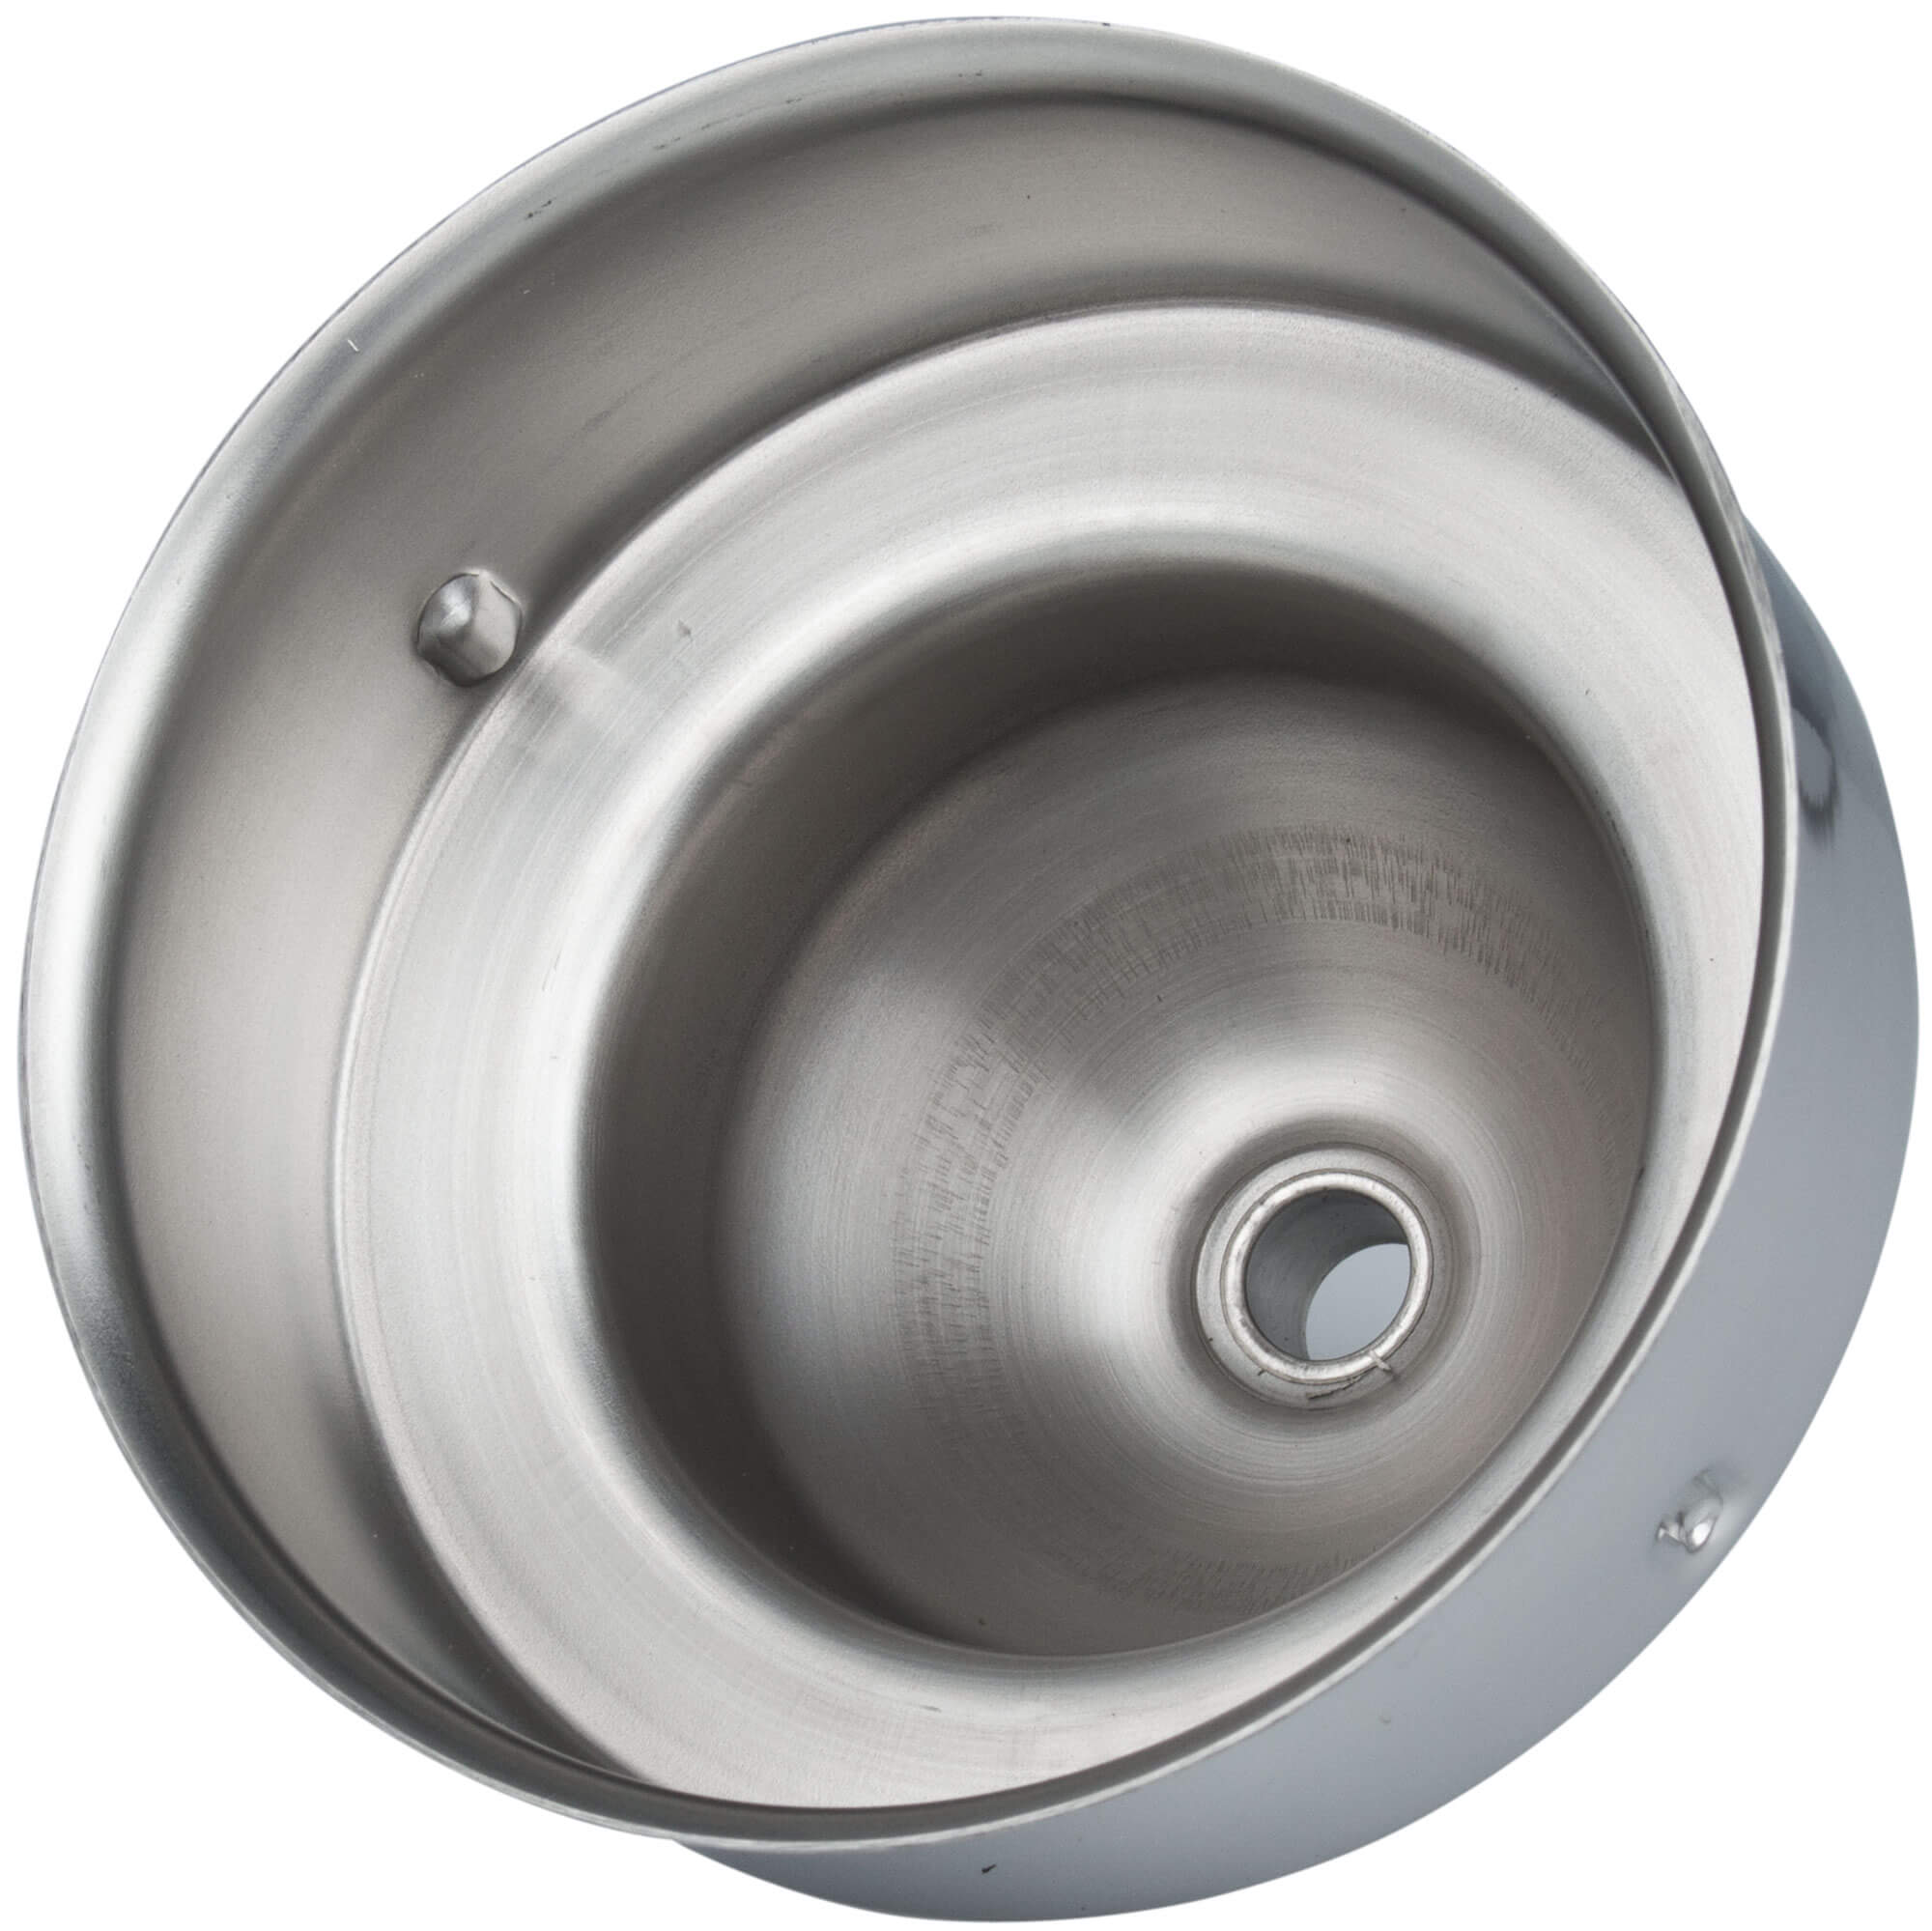 Bowl - spare part for Cancan manual juicer